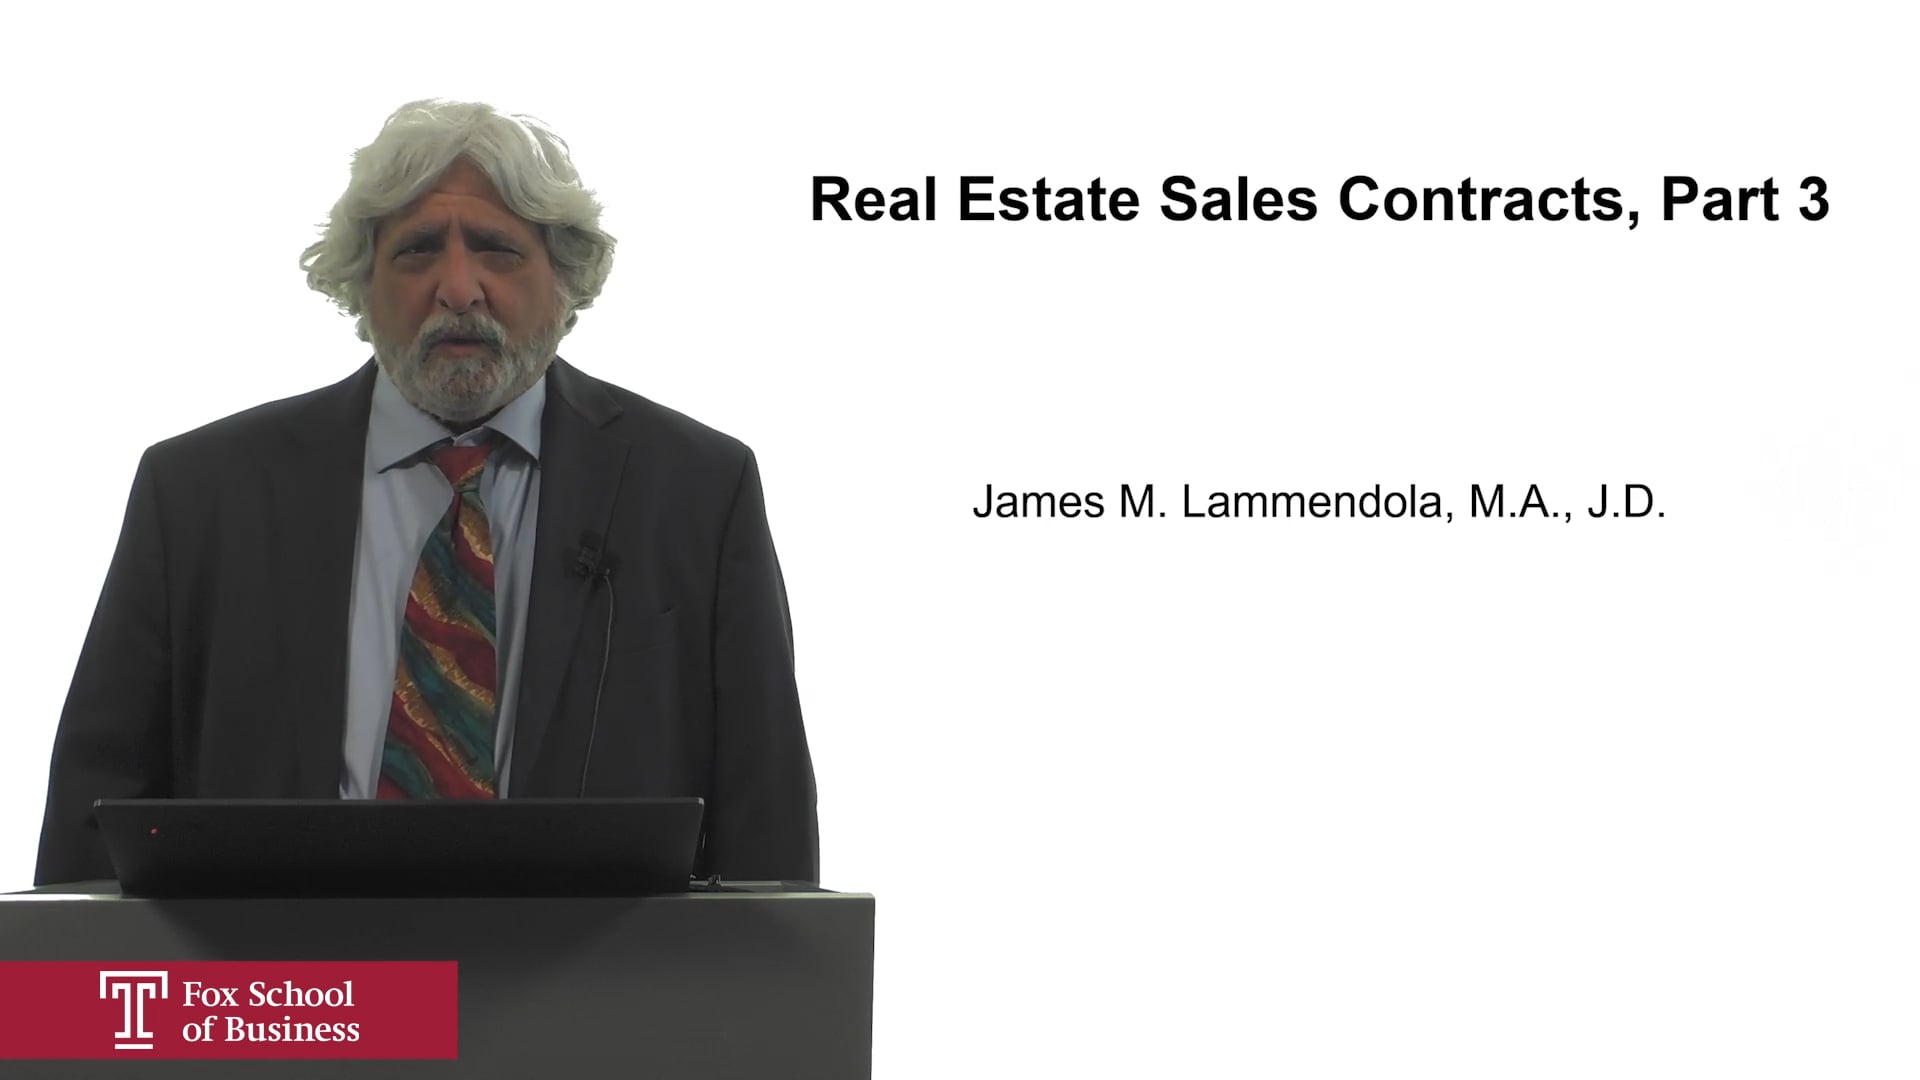 Real Estate Sale Contracts, Part 3